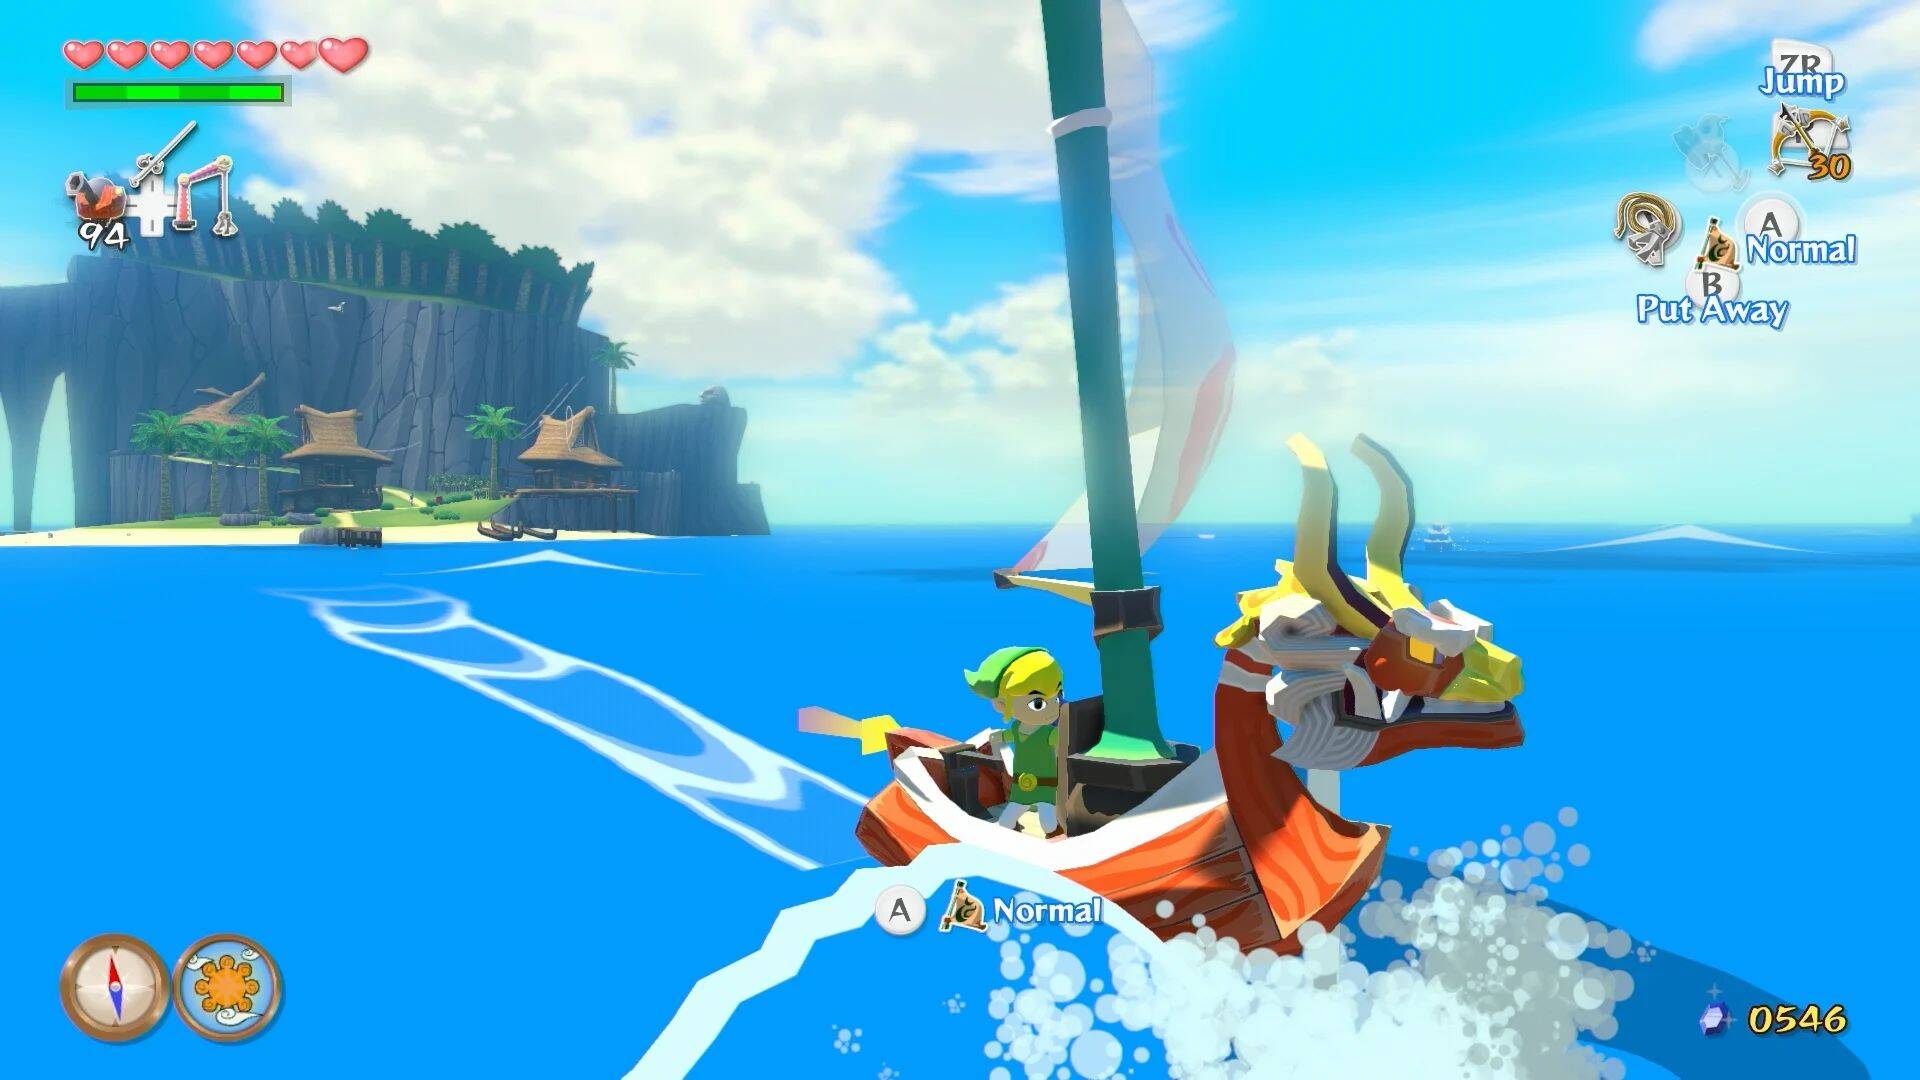 Miyamoto was embarrassed by Wind Waker: he hated the aesthetics of the game